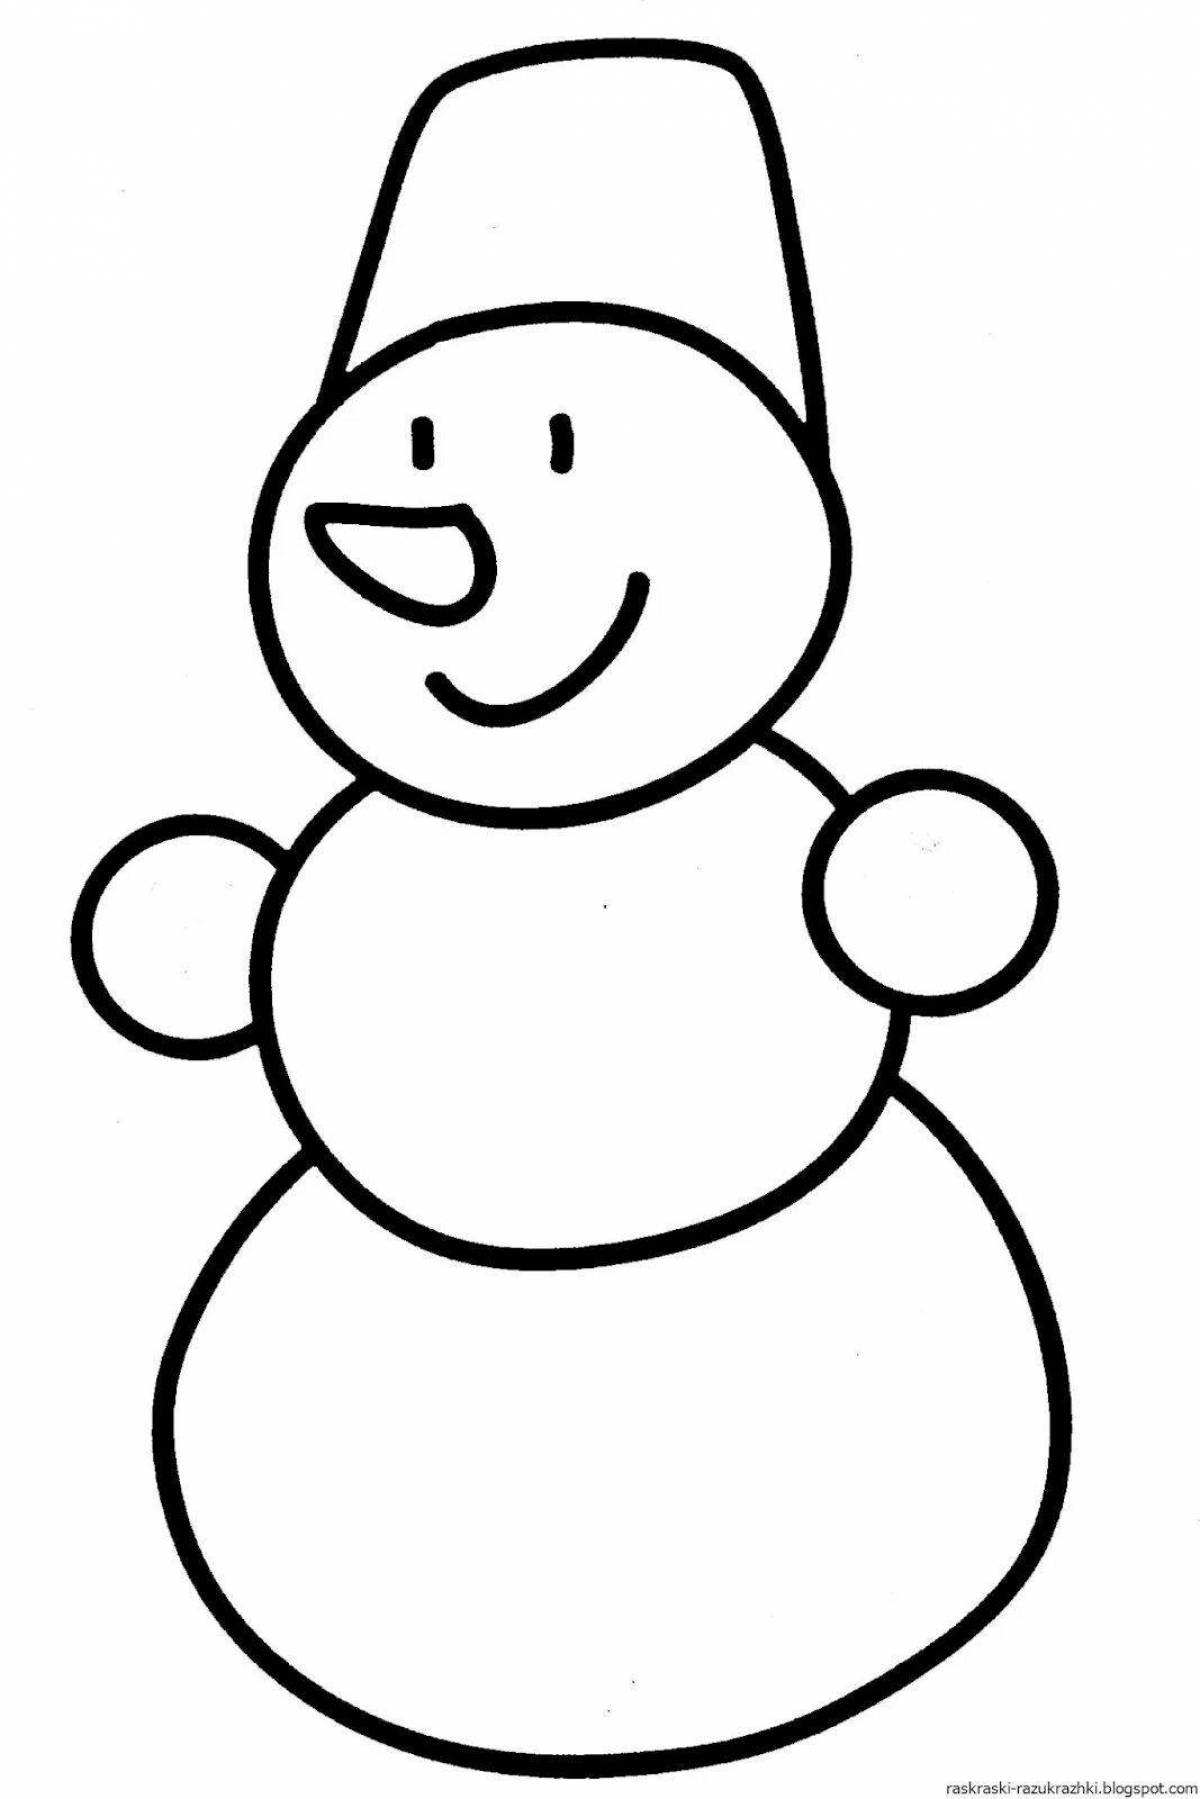 Snowman for children 2 3 years old #14